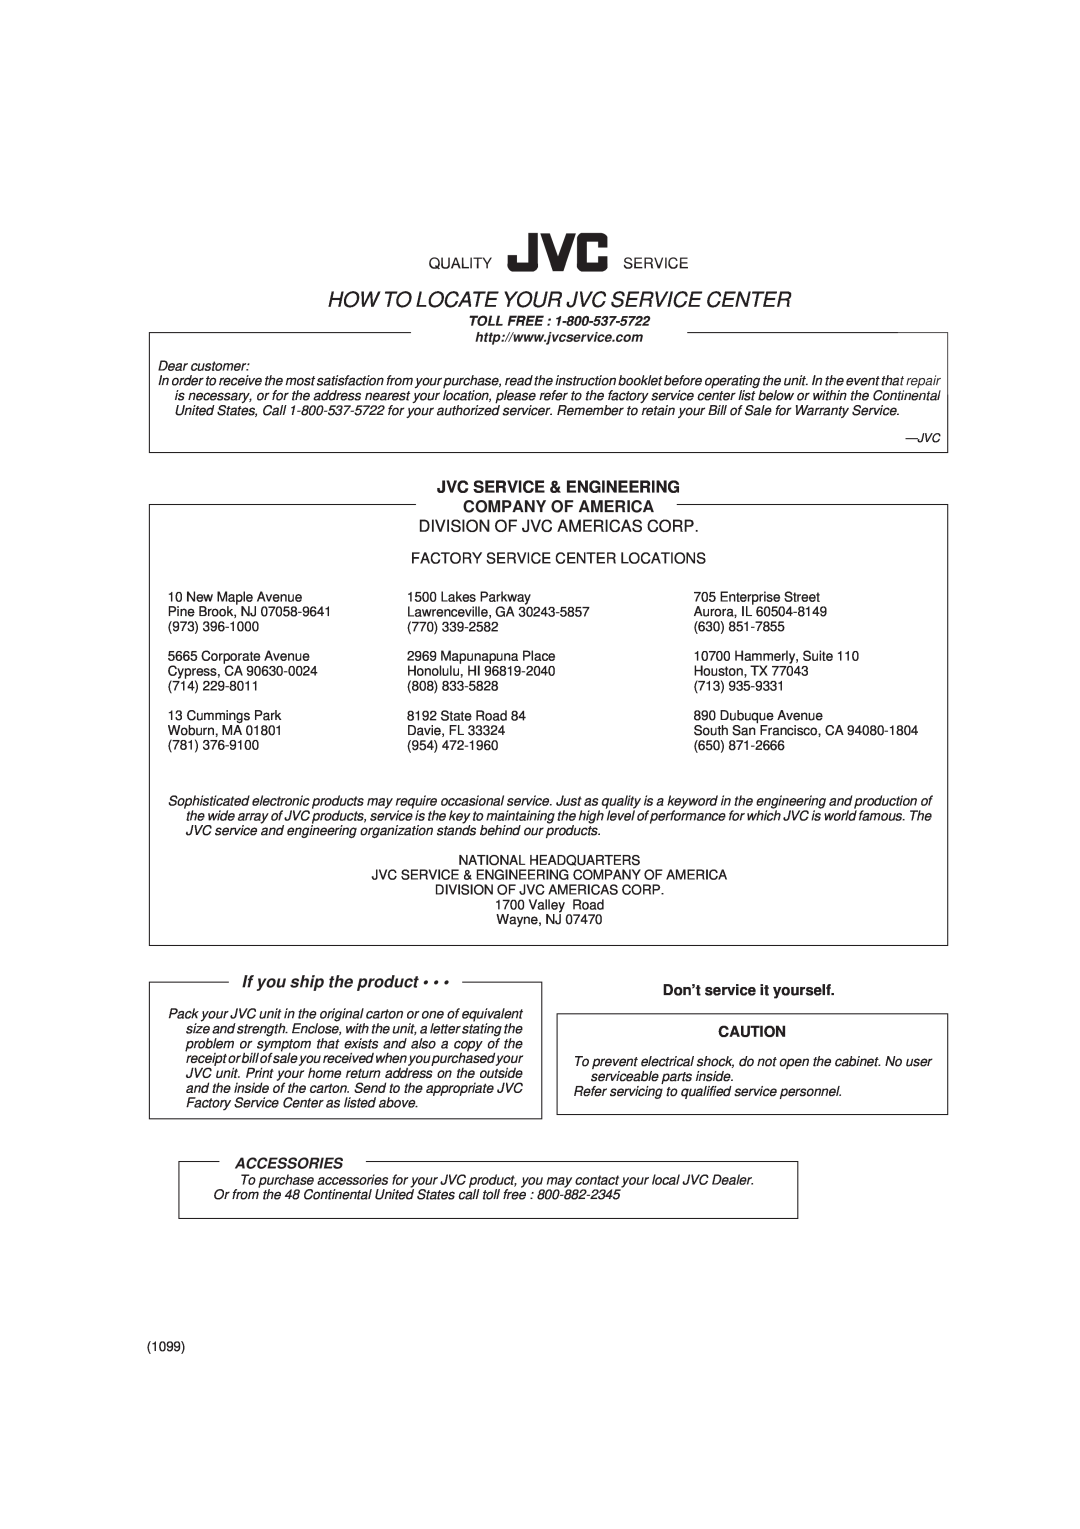 JVC RX-6500VBK Division Of Jvc Americas Corp, How To Locate Your Jvc Service Center, If you ship the product, Accessories 